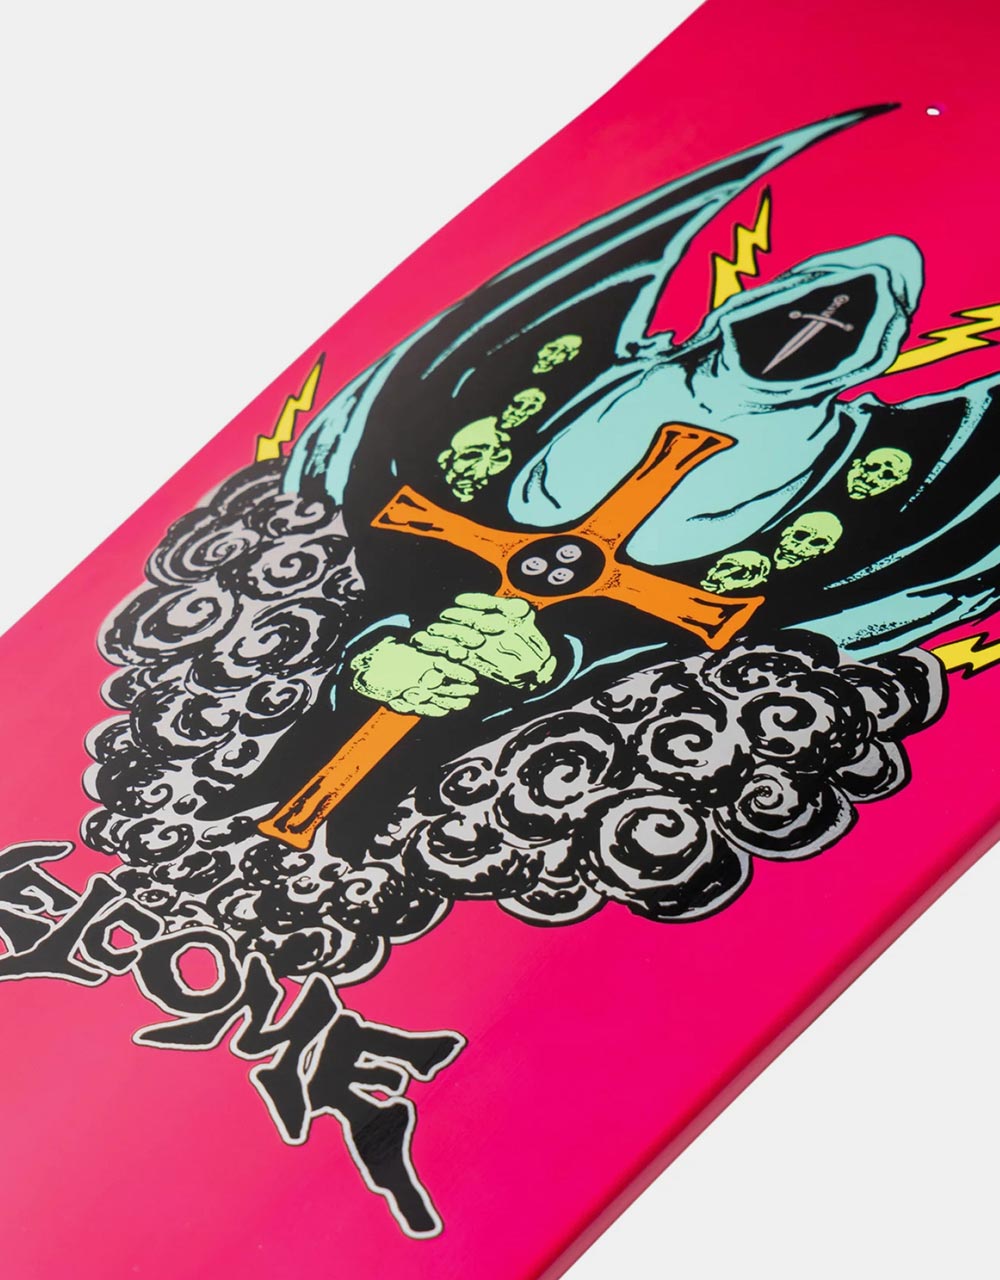 Welcome Knight on Early Grab Skateboard Deck - 10"